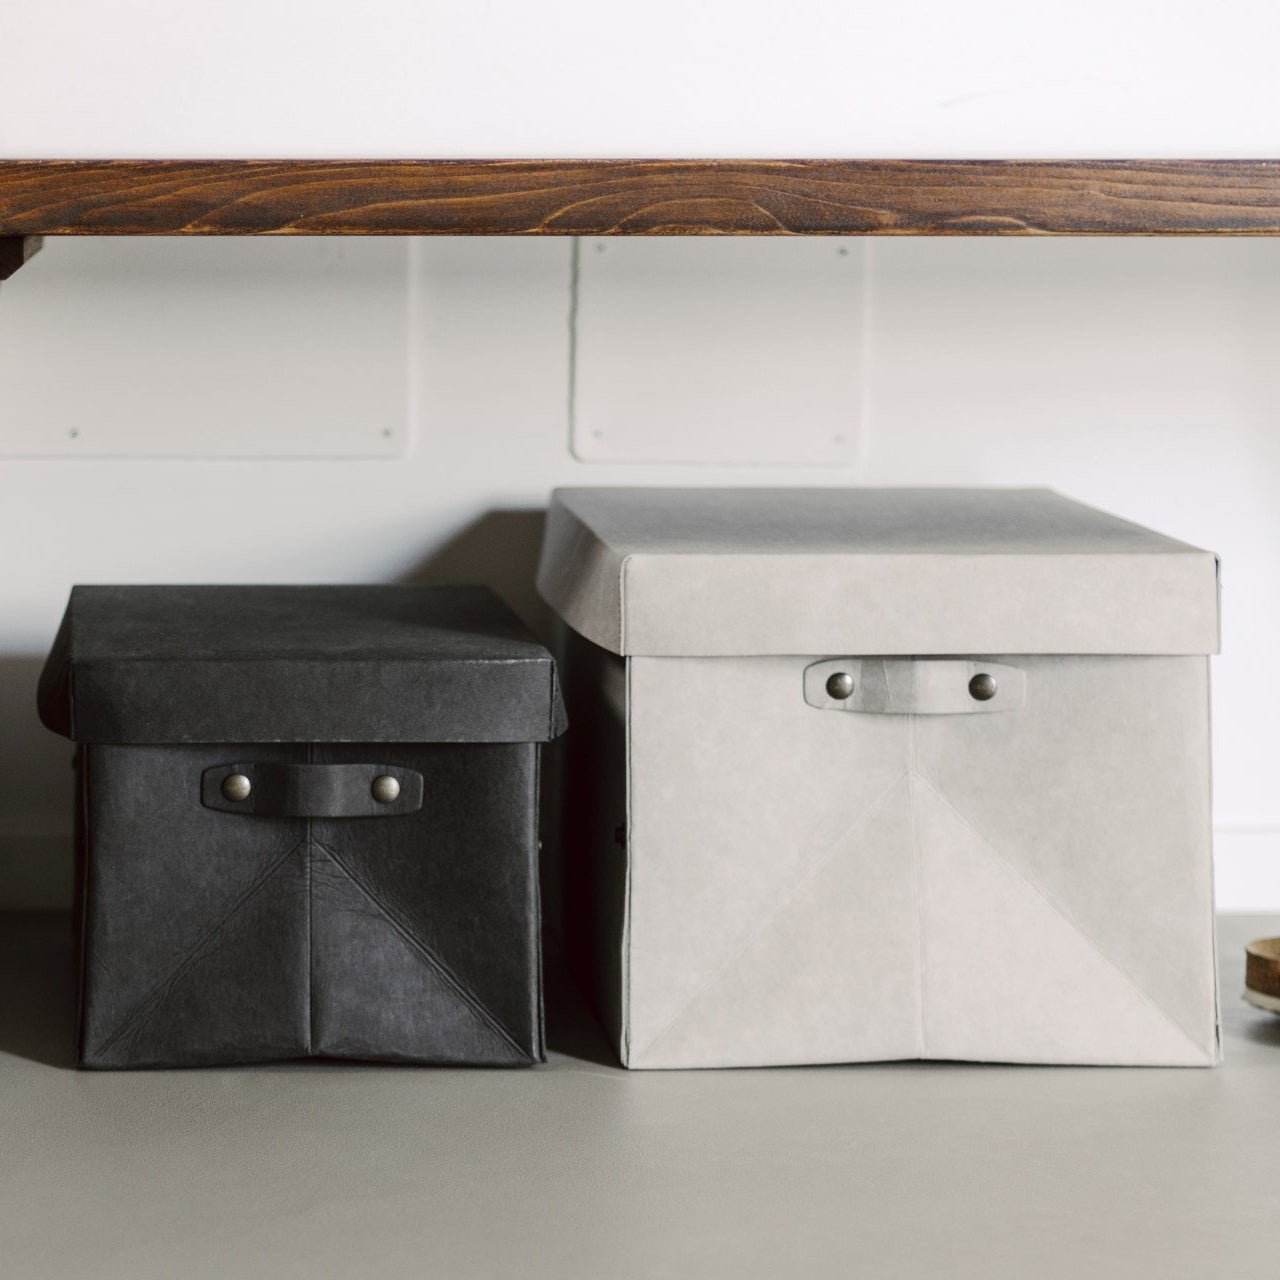 Two washable paper lidded boxes are shown in a home setting. The one at left is smaller and black and the one at right is grey.